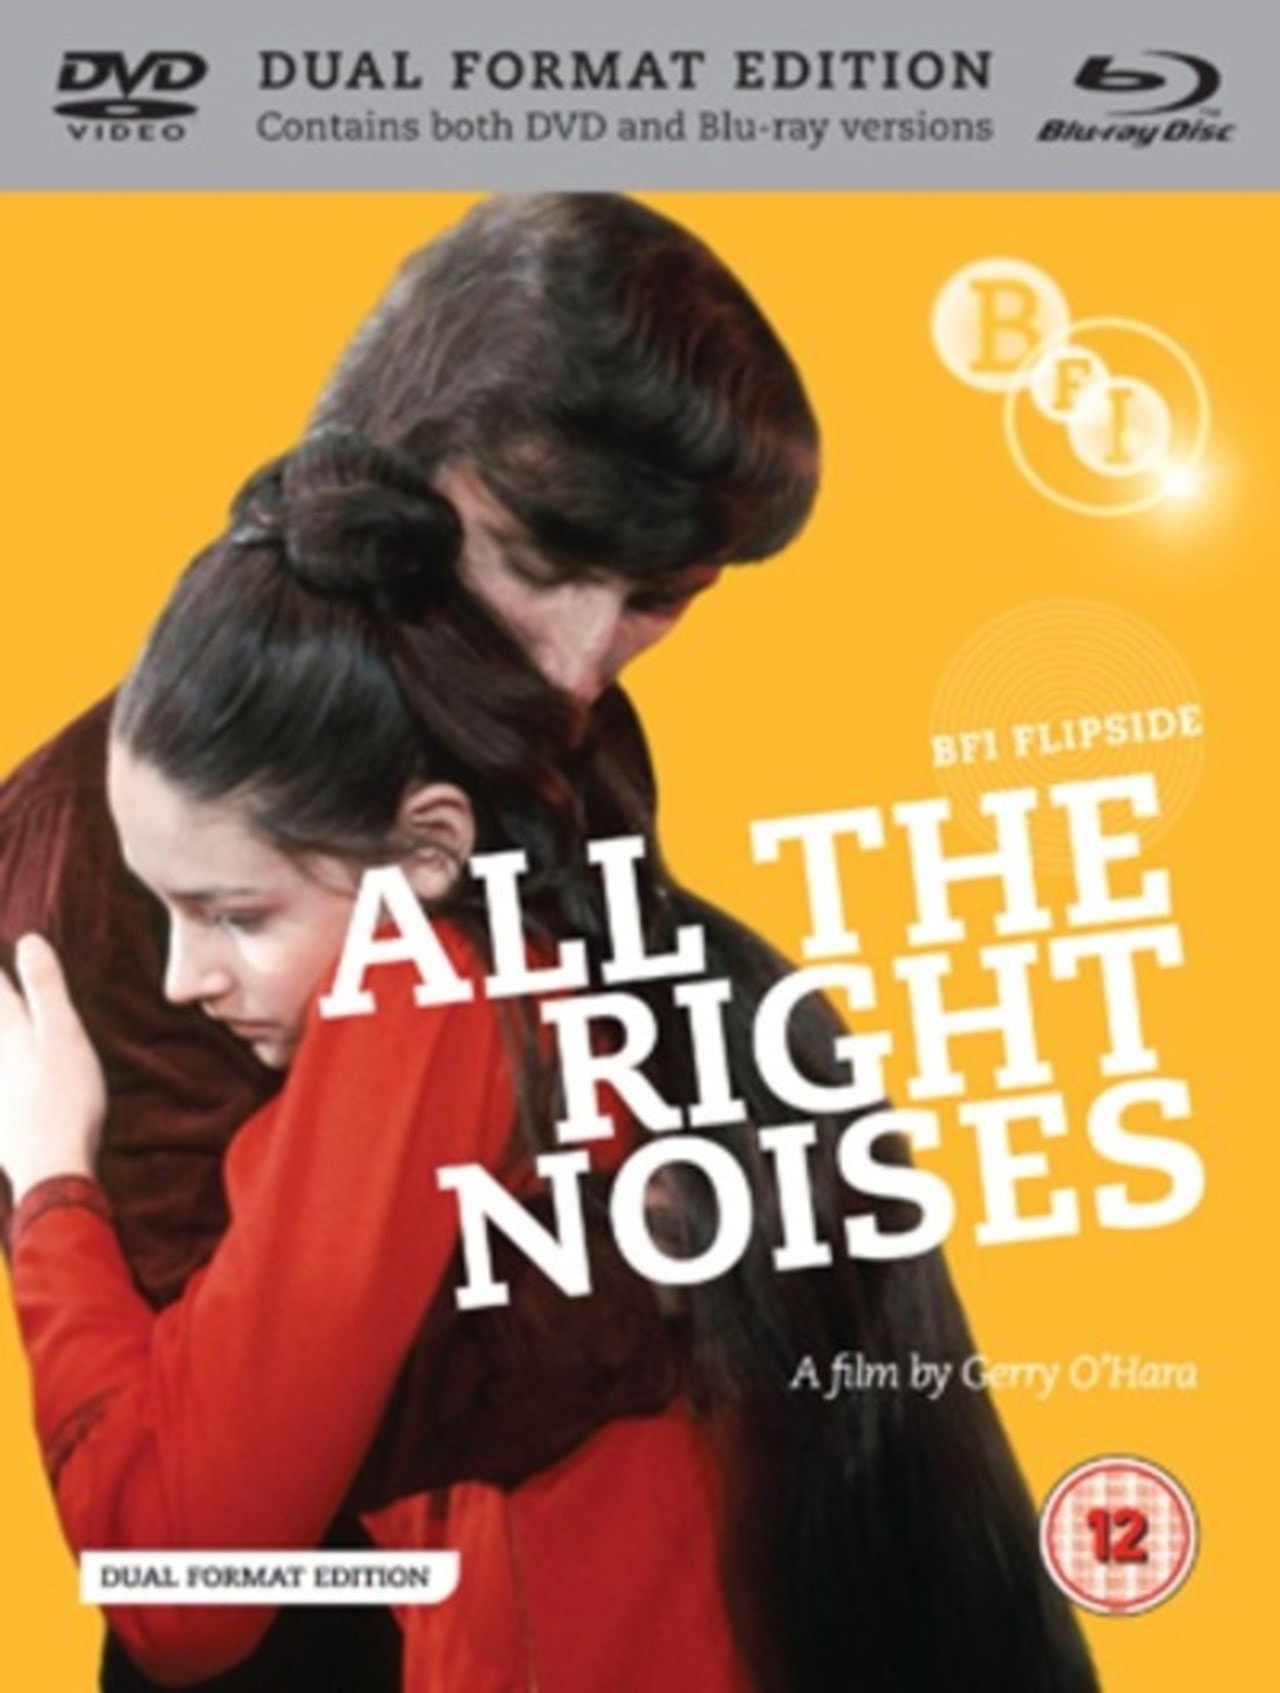 All The Right Noises | Gerry O'hara